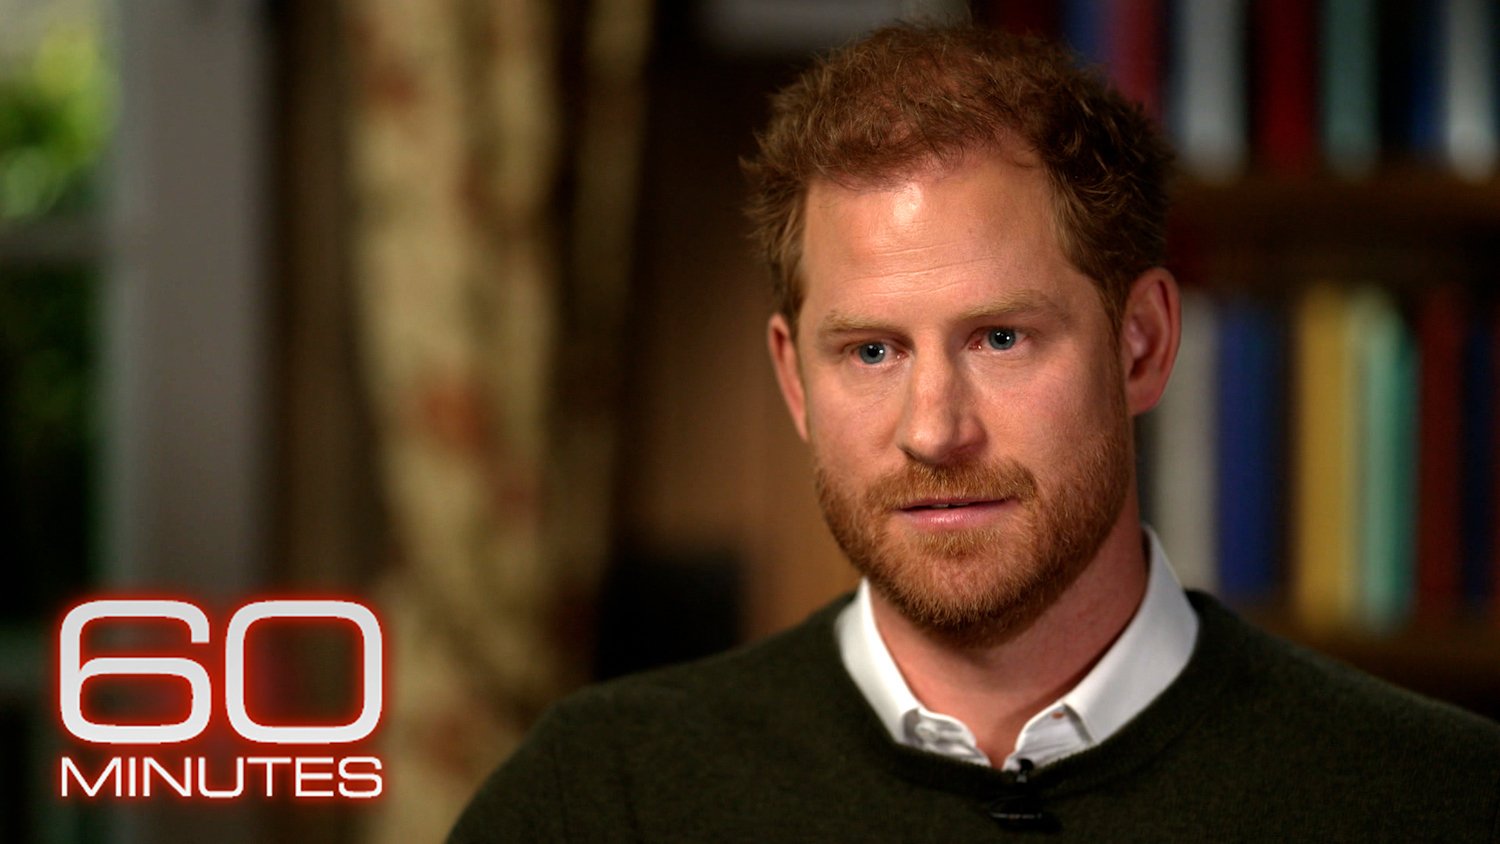 Prince Harry body language during 60 Minutes interview showed discomfort, according to expert